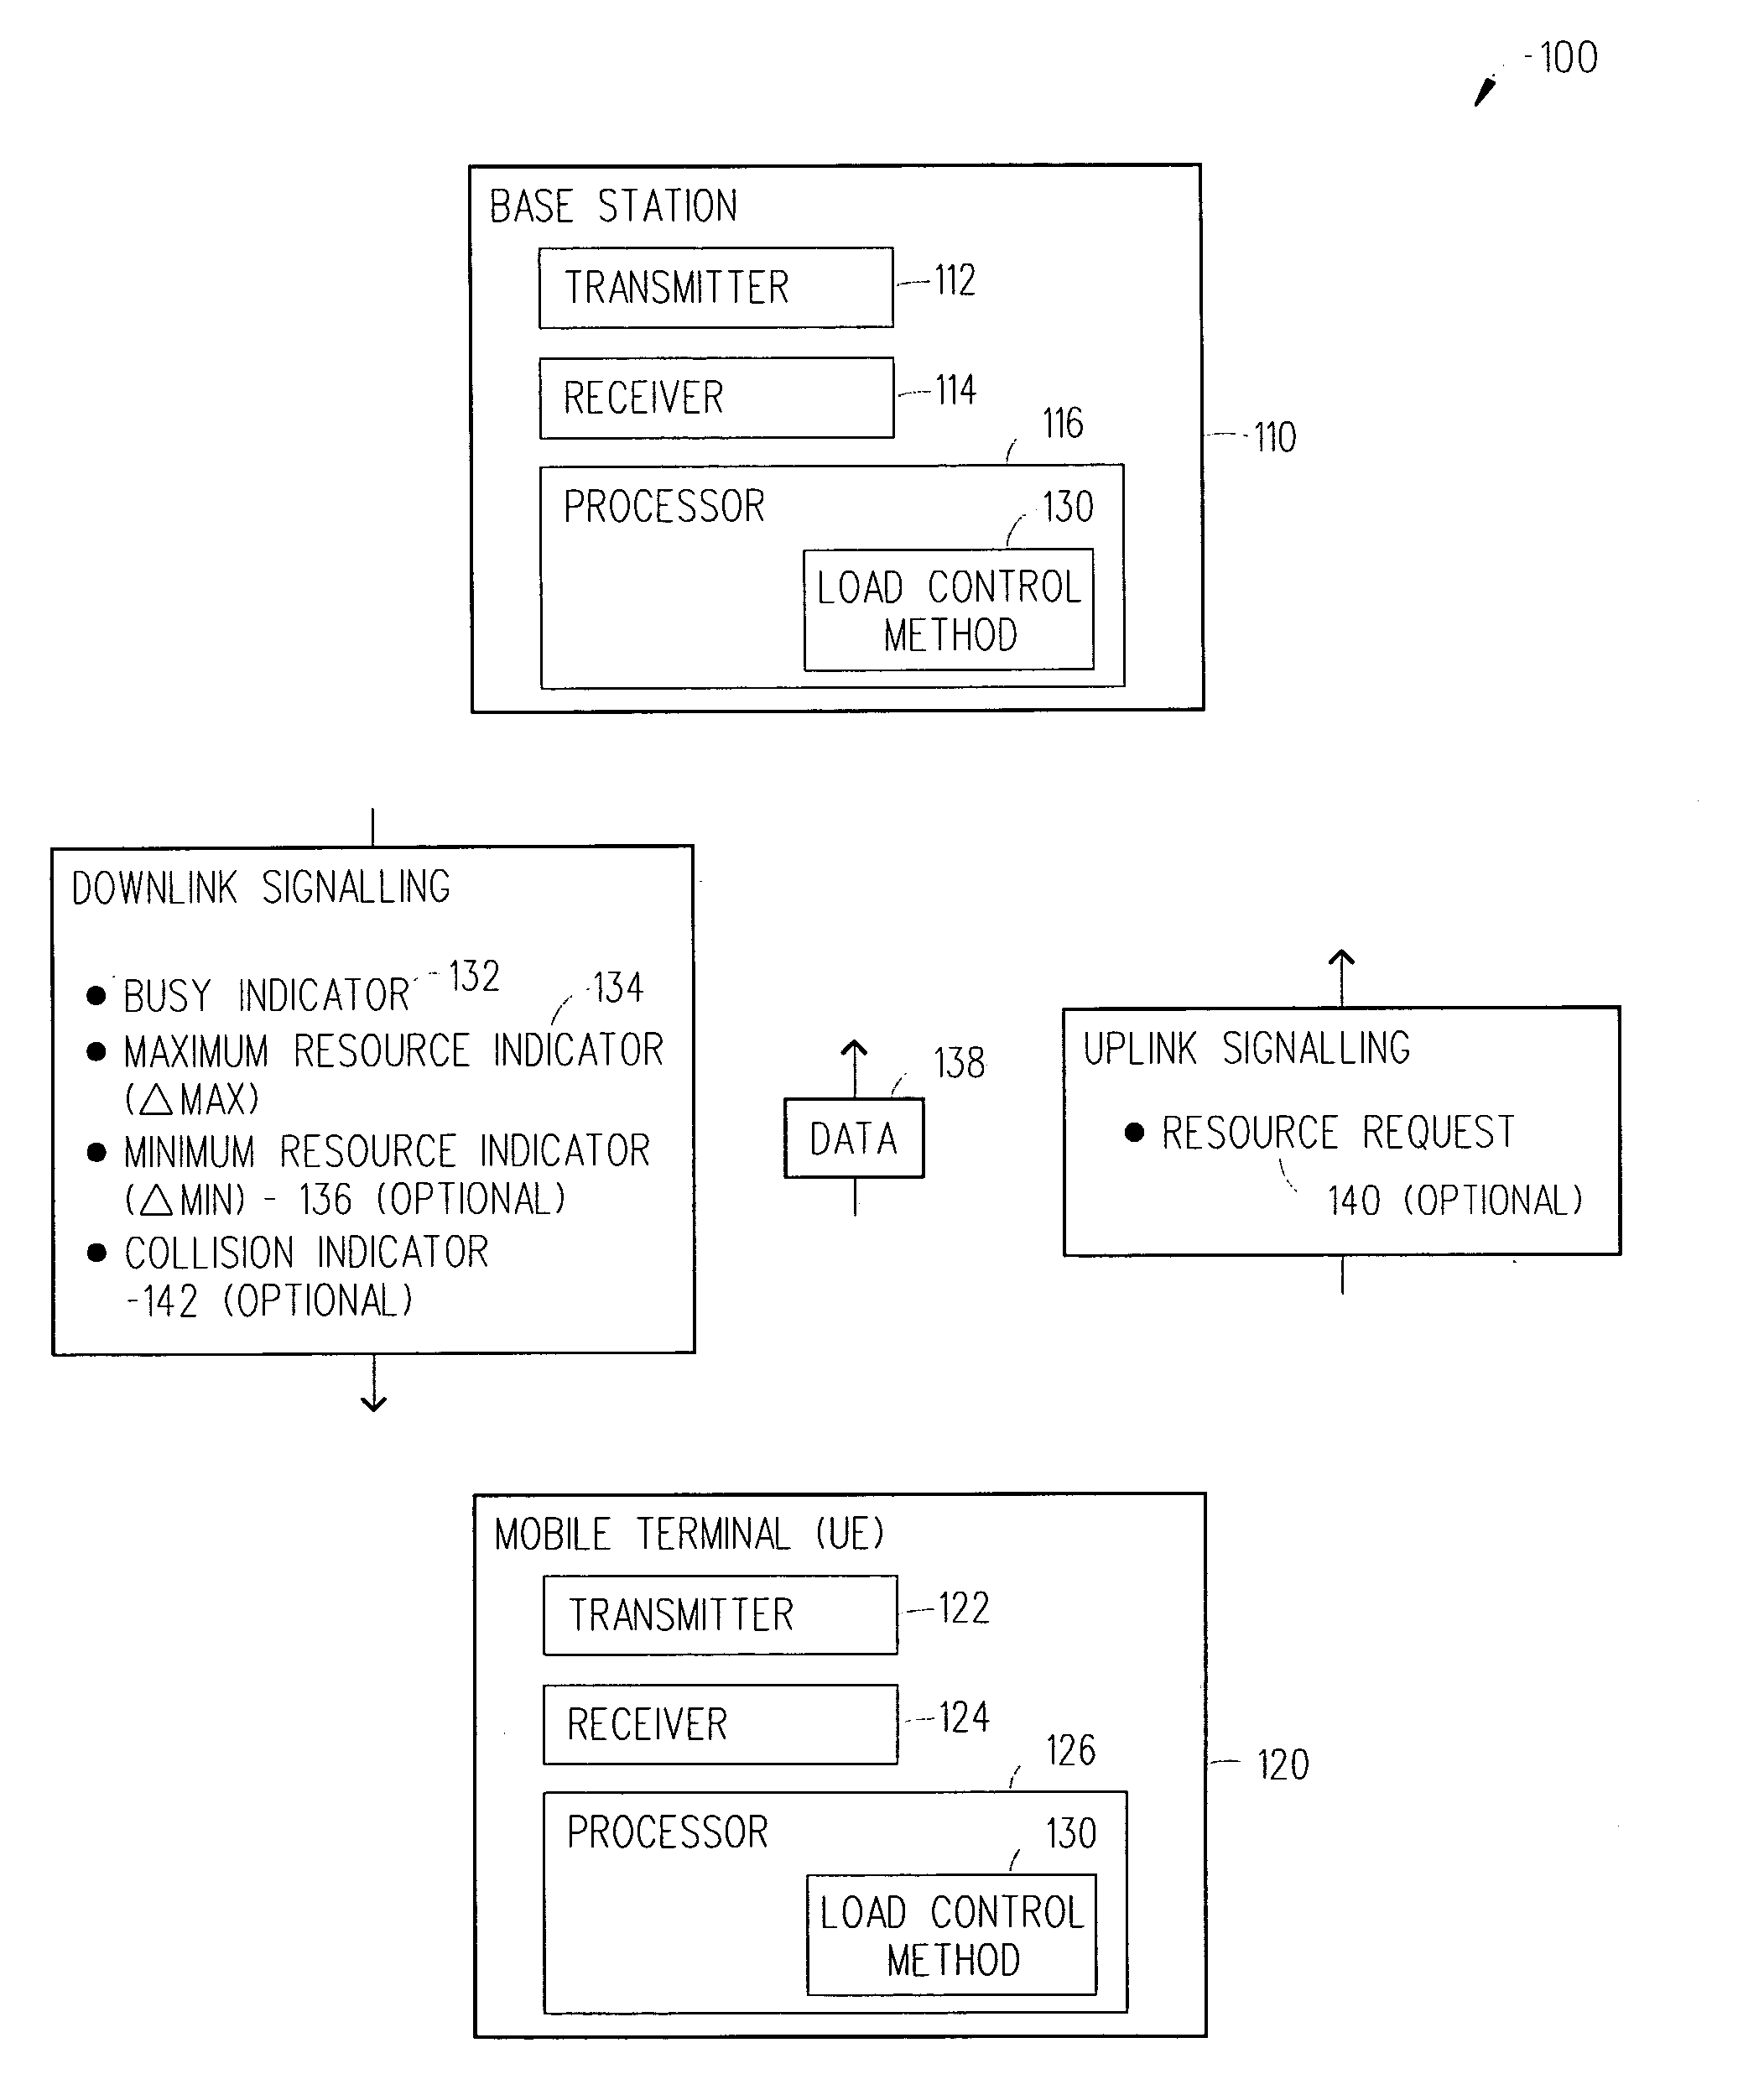 Load control in shared medium many-to-one communication systems